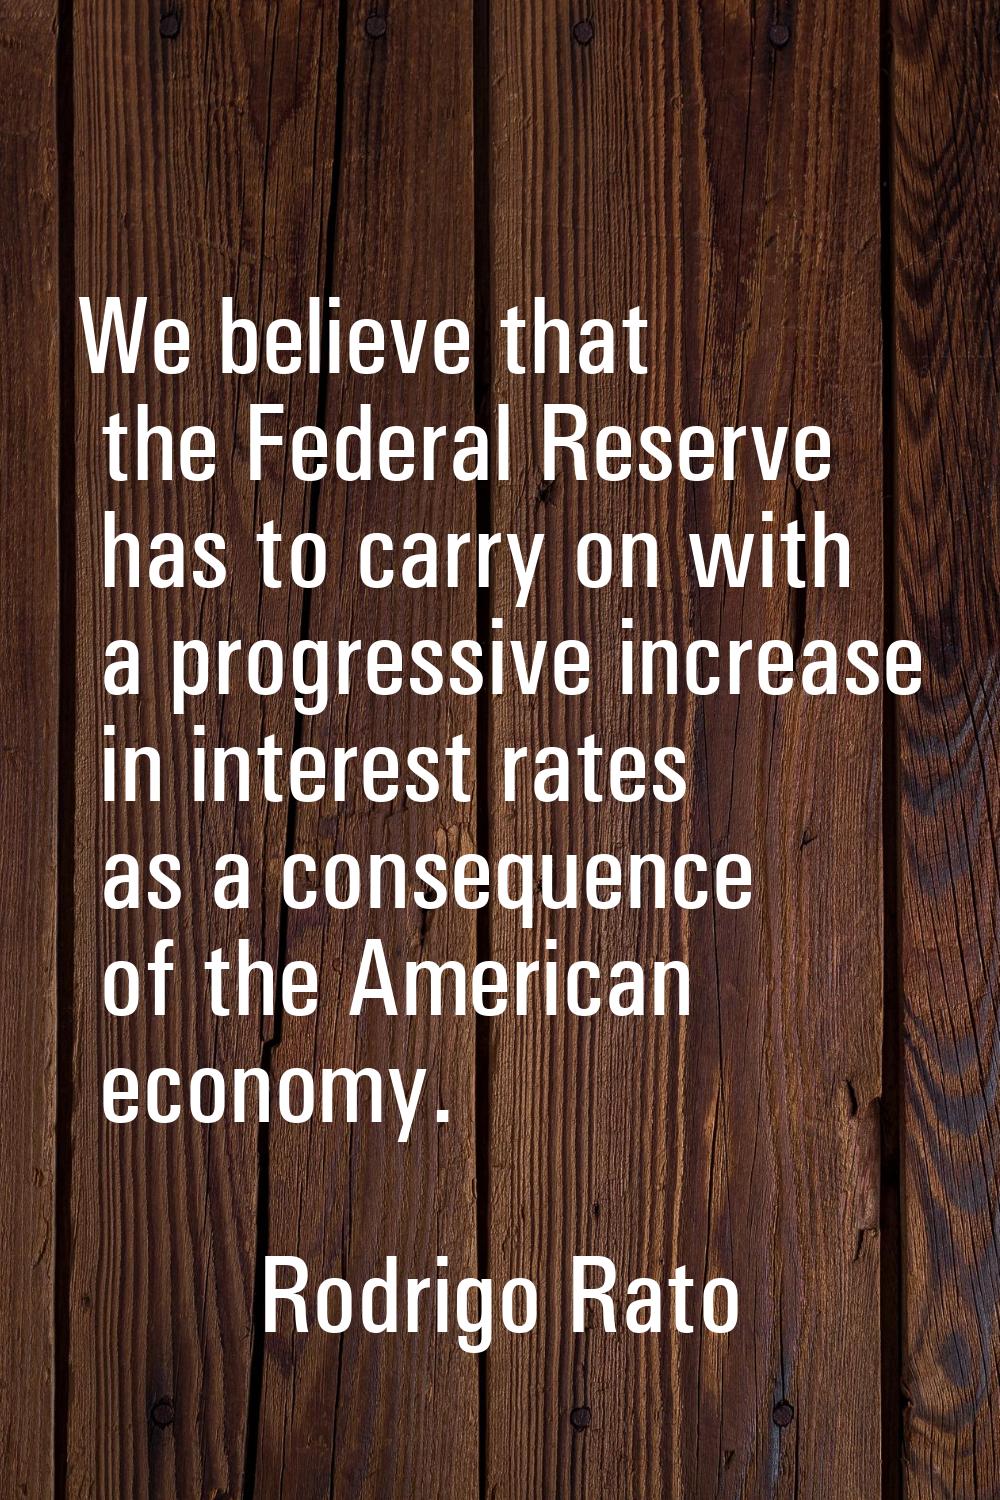 We believe that the Federal Reserve has to carry on with a progressive increase in interest rates a